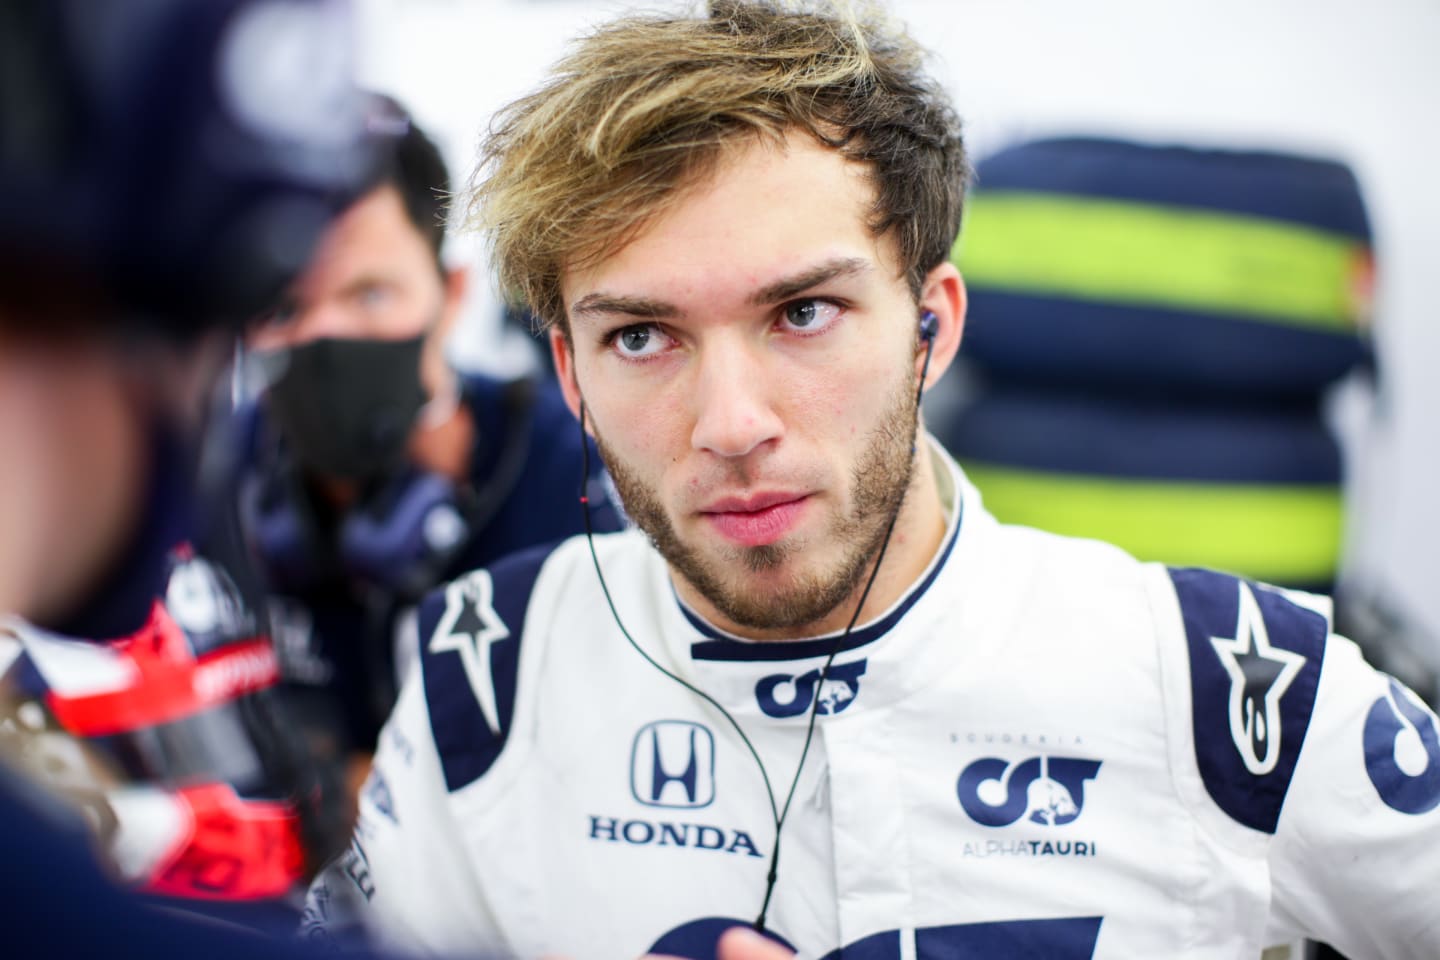 BAHRAIN, BAHRAIN - DECEMBER 05: Pierre Gasly of Scuderia AlphaTauri and France  during qualifying ahead of the F1 Grand Prix of Sakhir at Bahrain International Circuit on December 05, 2020 in Bahrain, Bahrain. (Photo by Peter Fox/Getty Images)